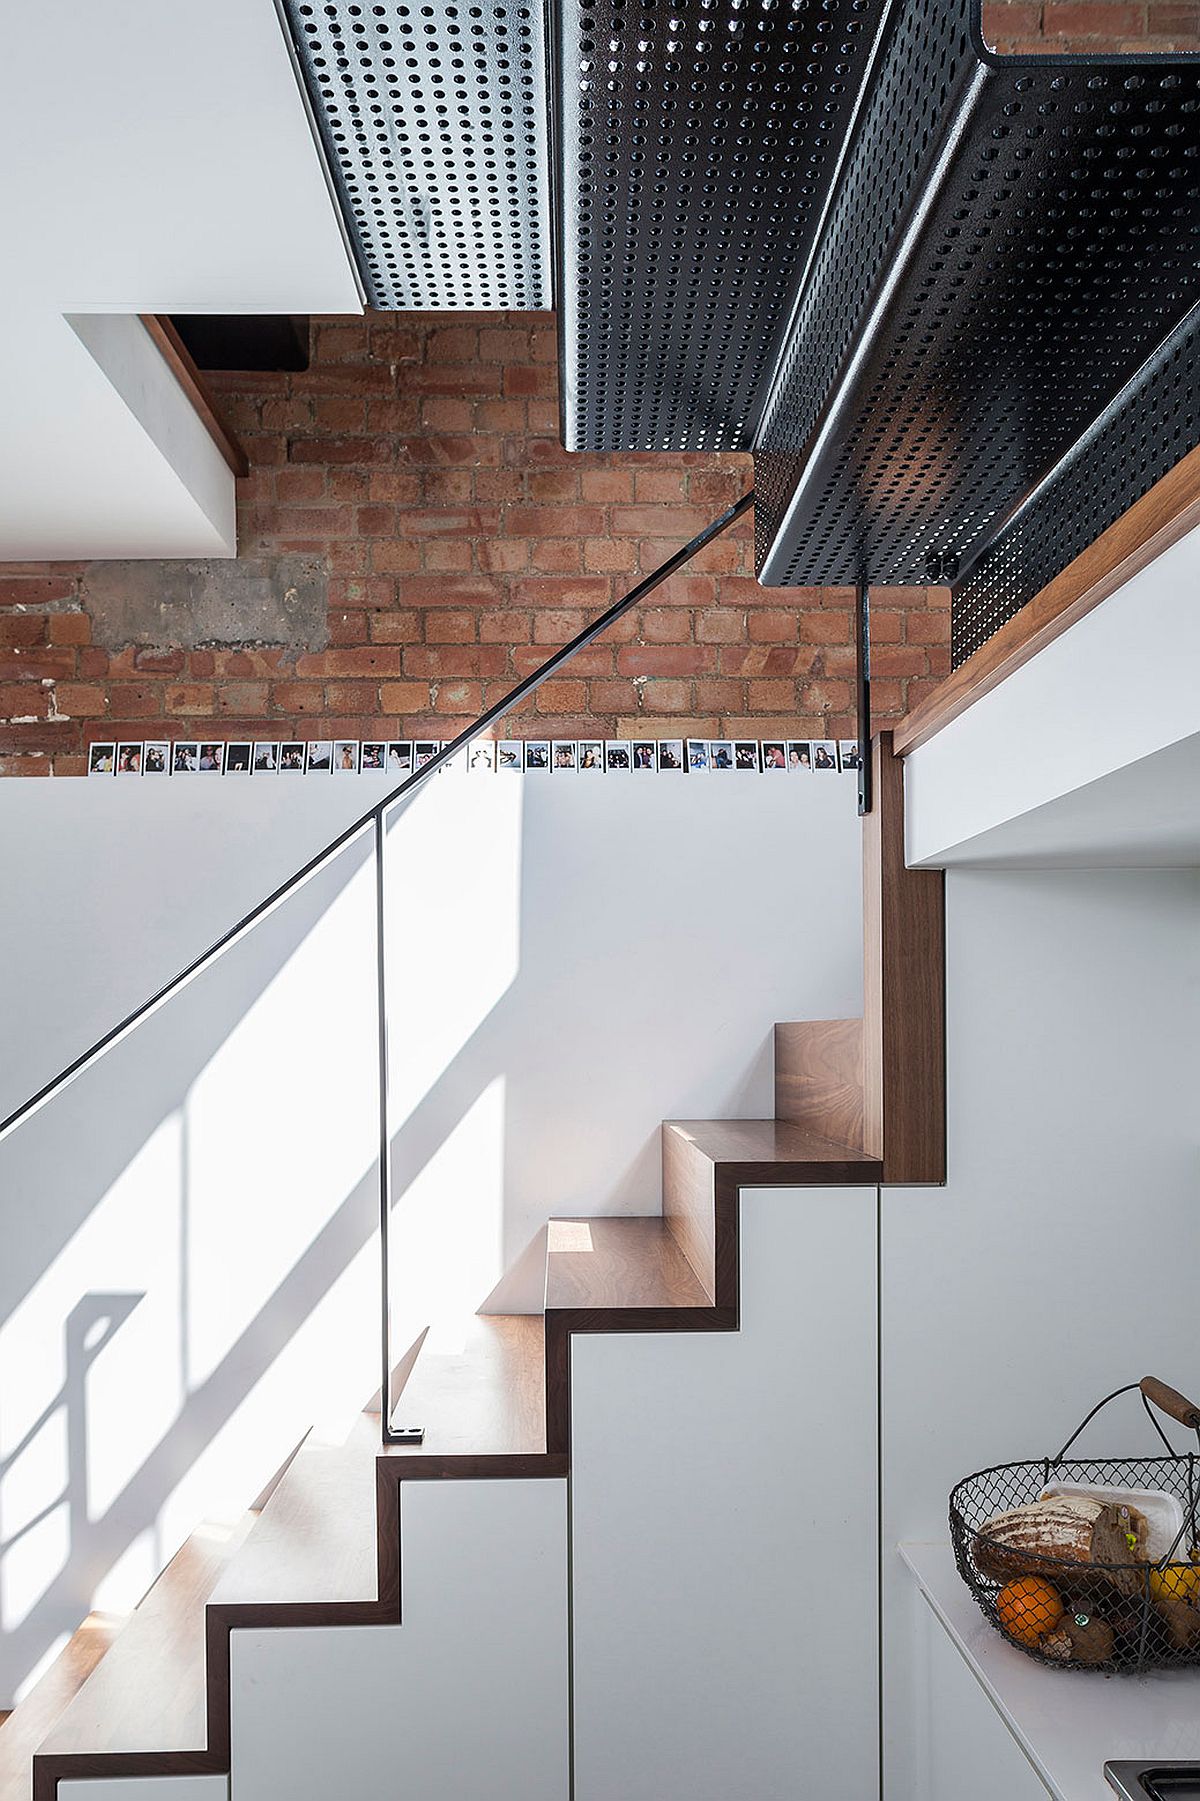 Storage space under the stairs along with perforated top level stairs that bring in natural light